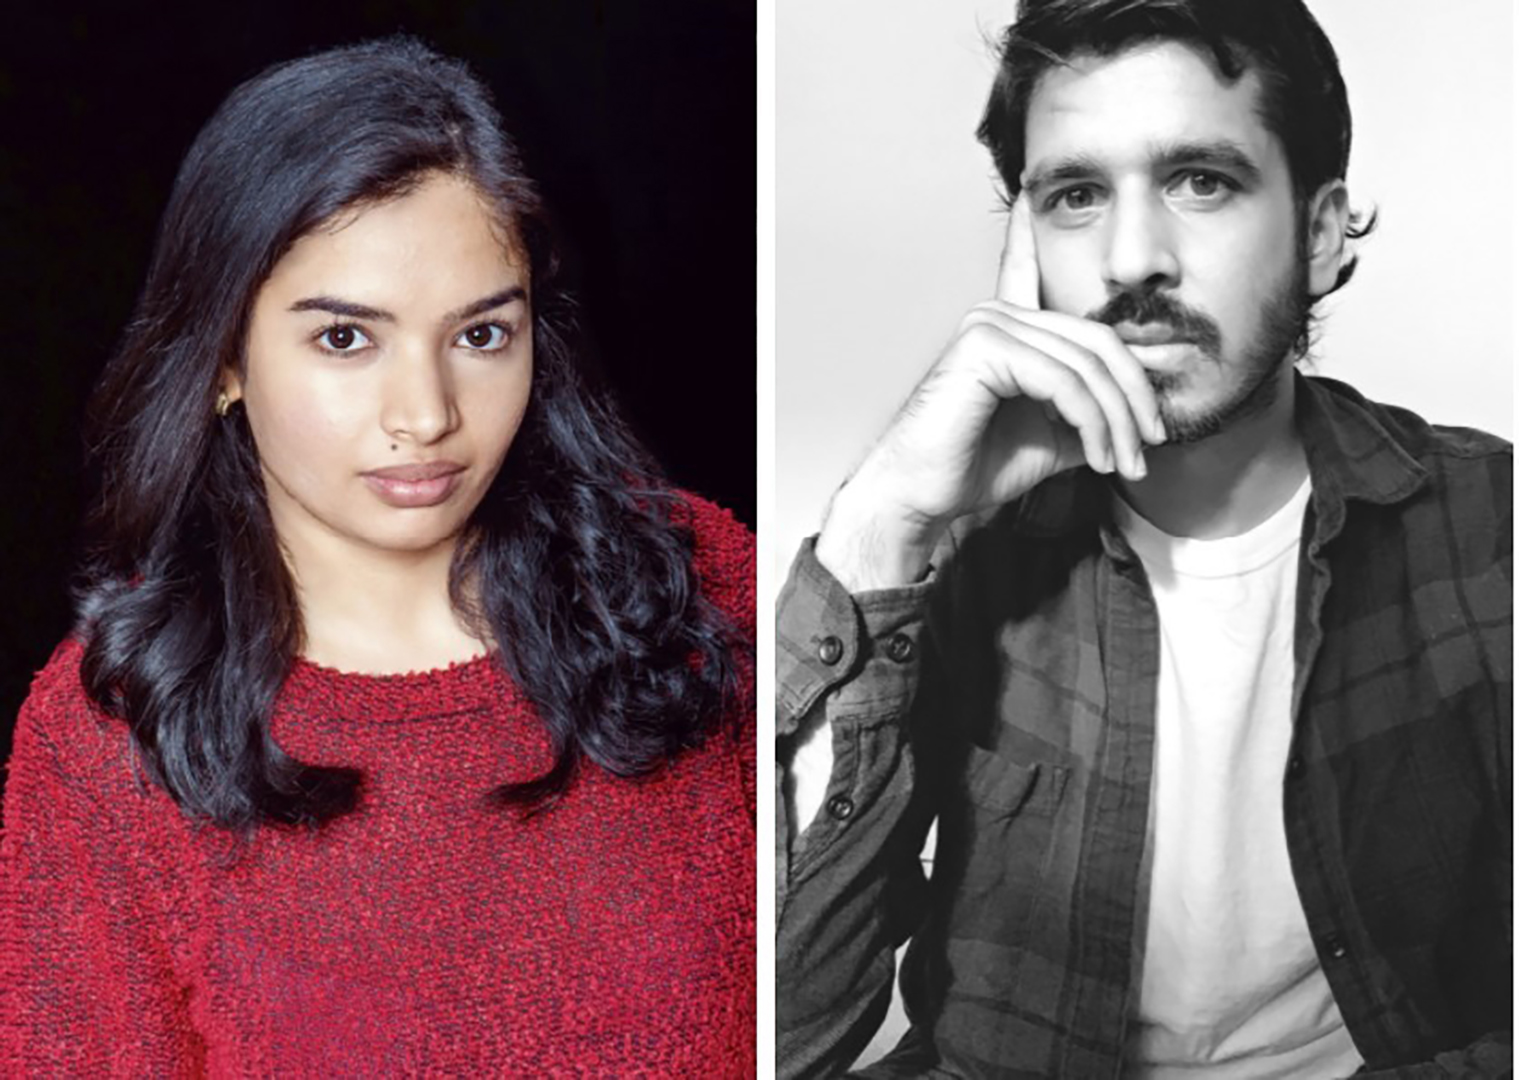 Naman Gupta & Janki Parekh received the inaugural Tasveer Film Fund for their LGBTQI+ themed sci-fi script "Coming Out with the Help of a Time Machine." This film is now in production, slated to be finished in Fall 2021.